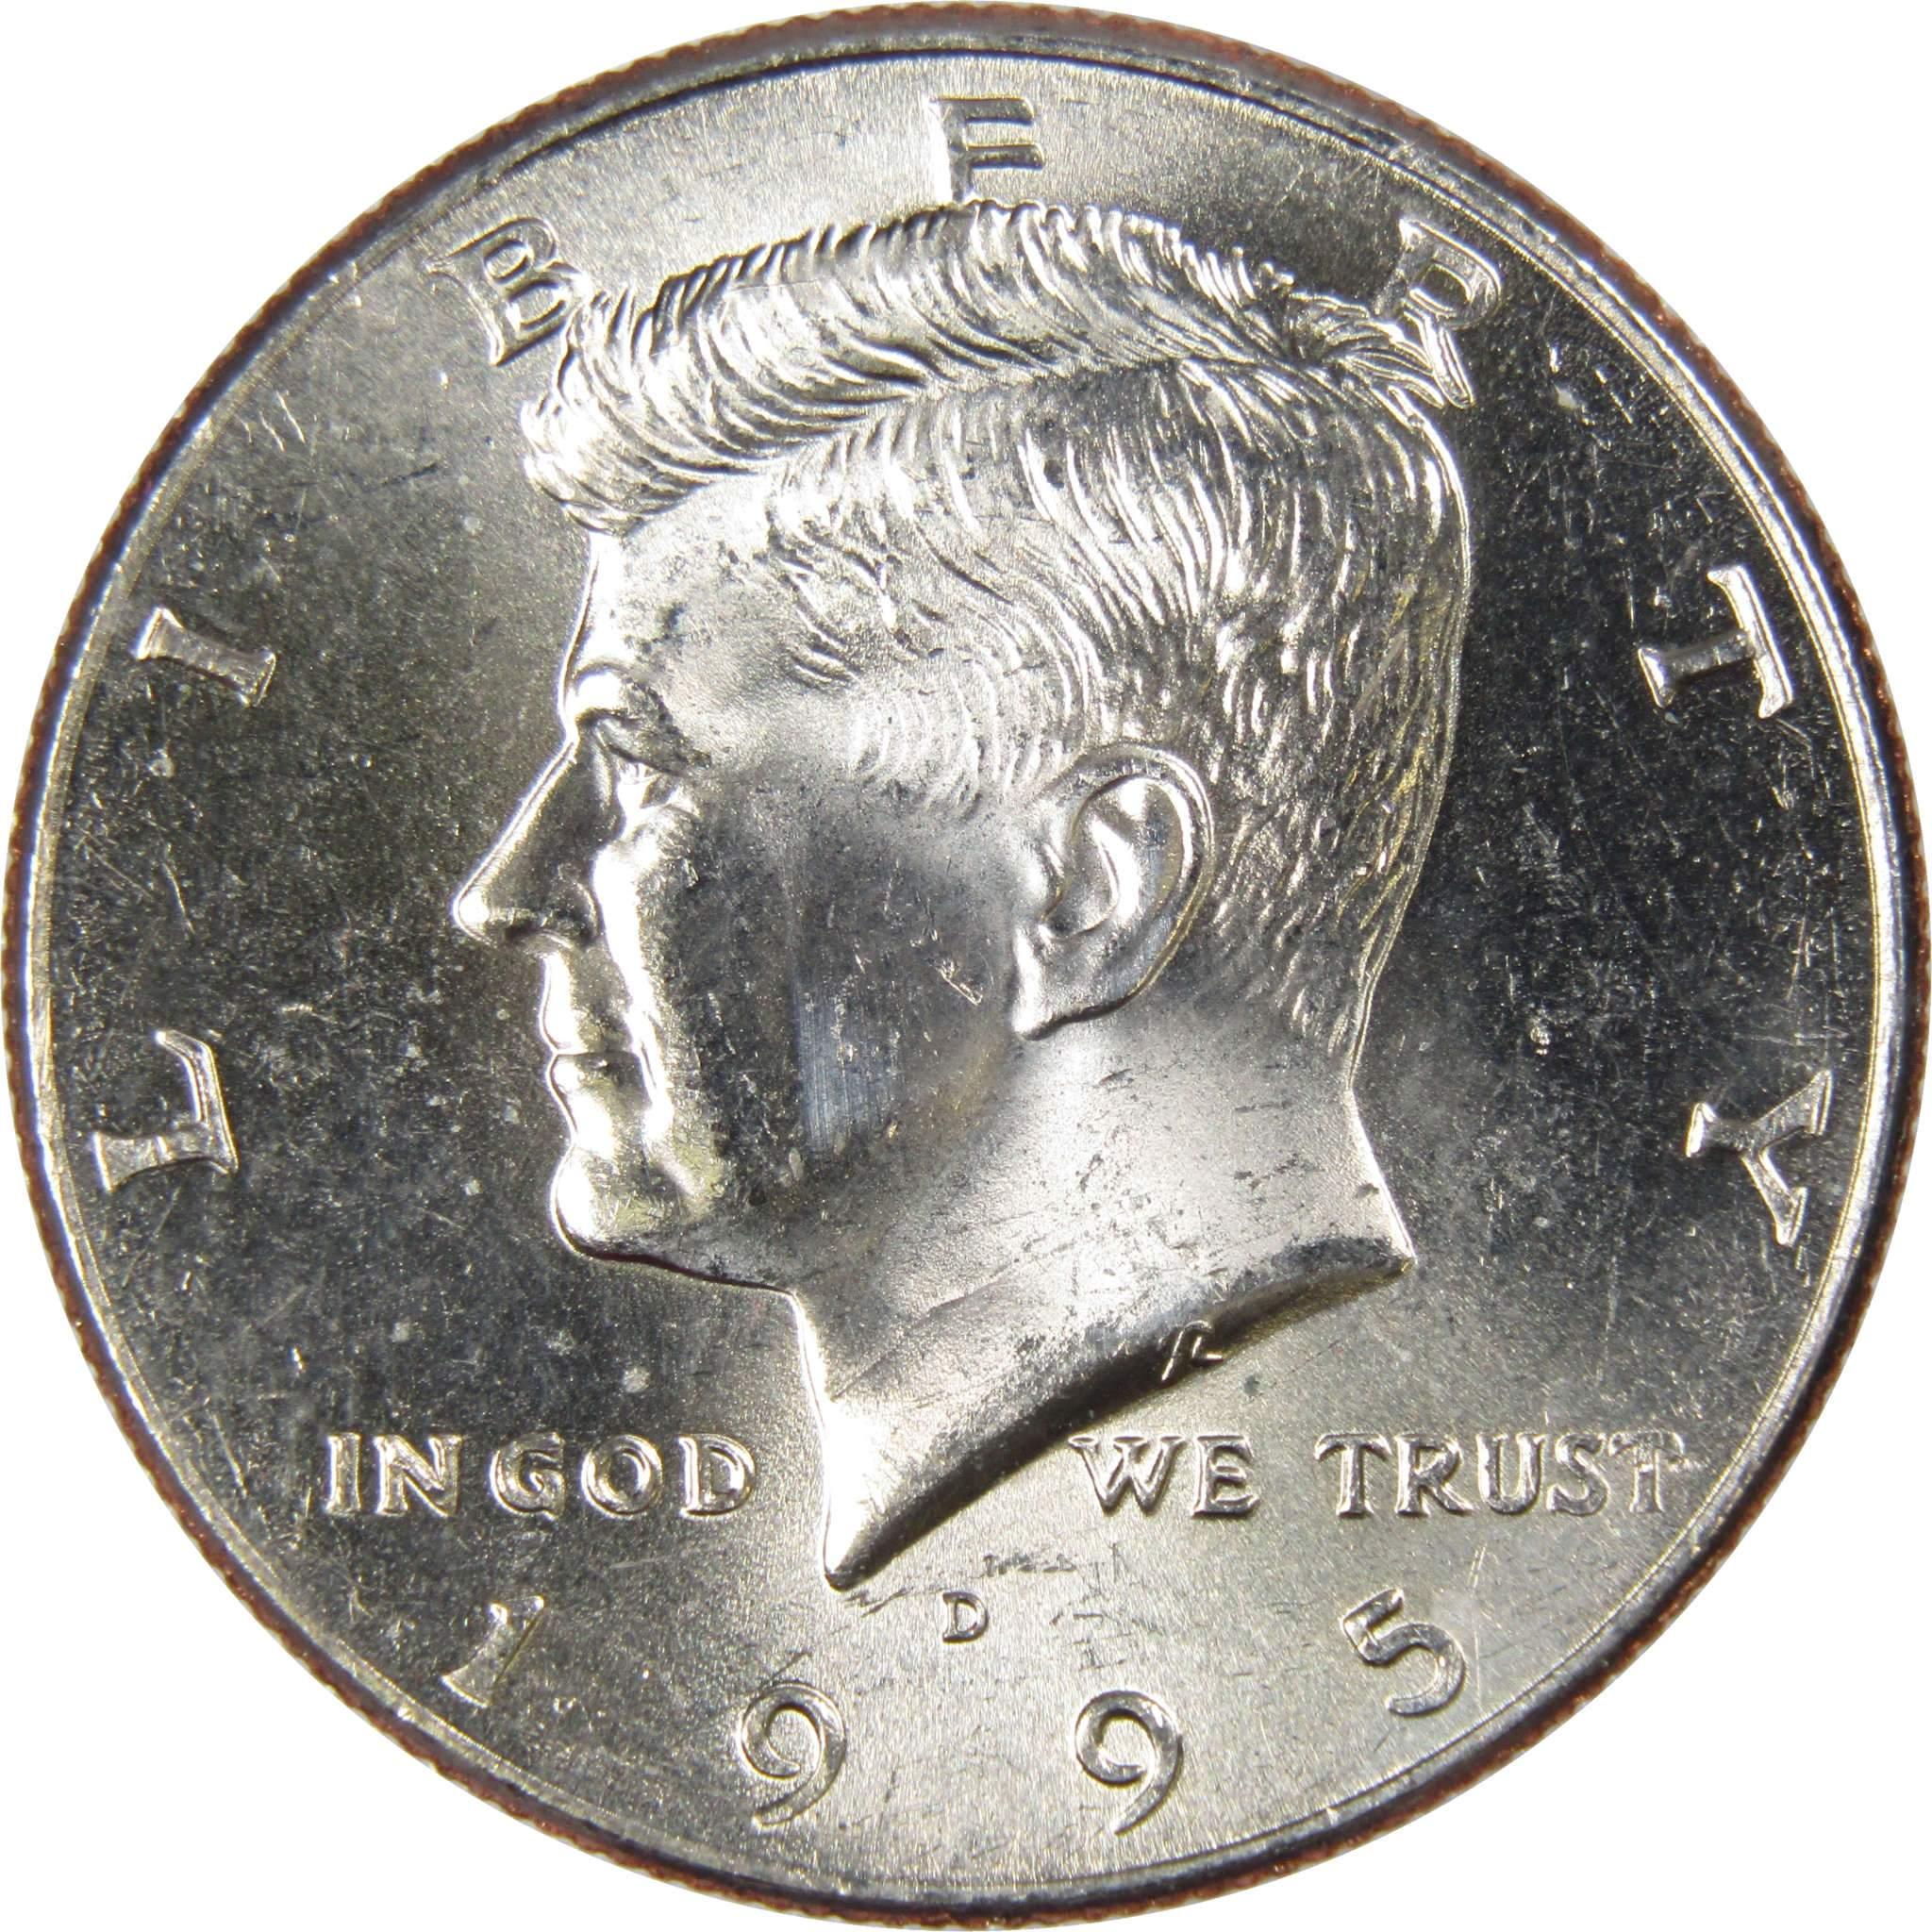 1995 D Kennedy Half Dollar BU Uncirculated Mint State 50c US Coin Collectible